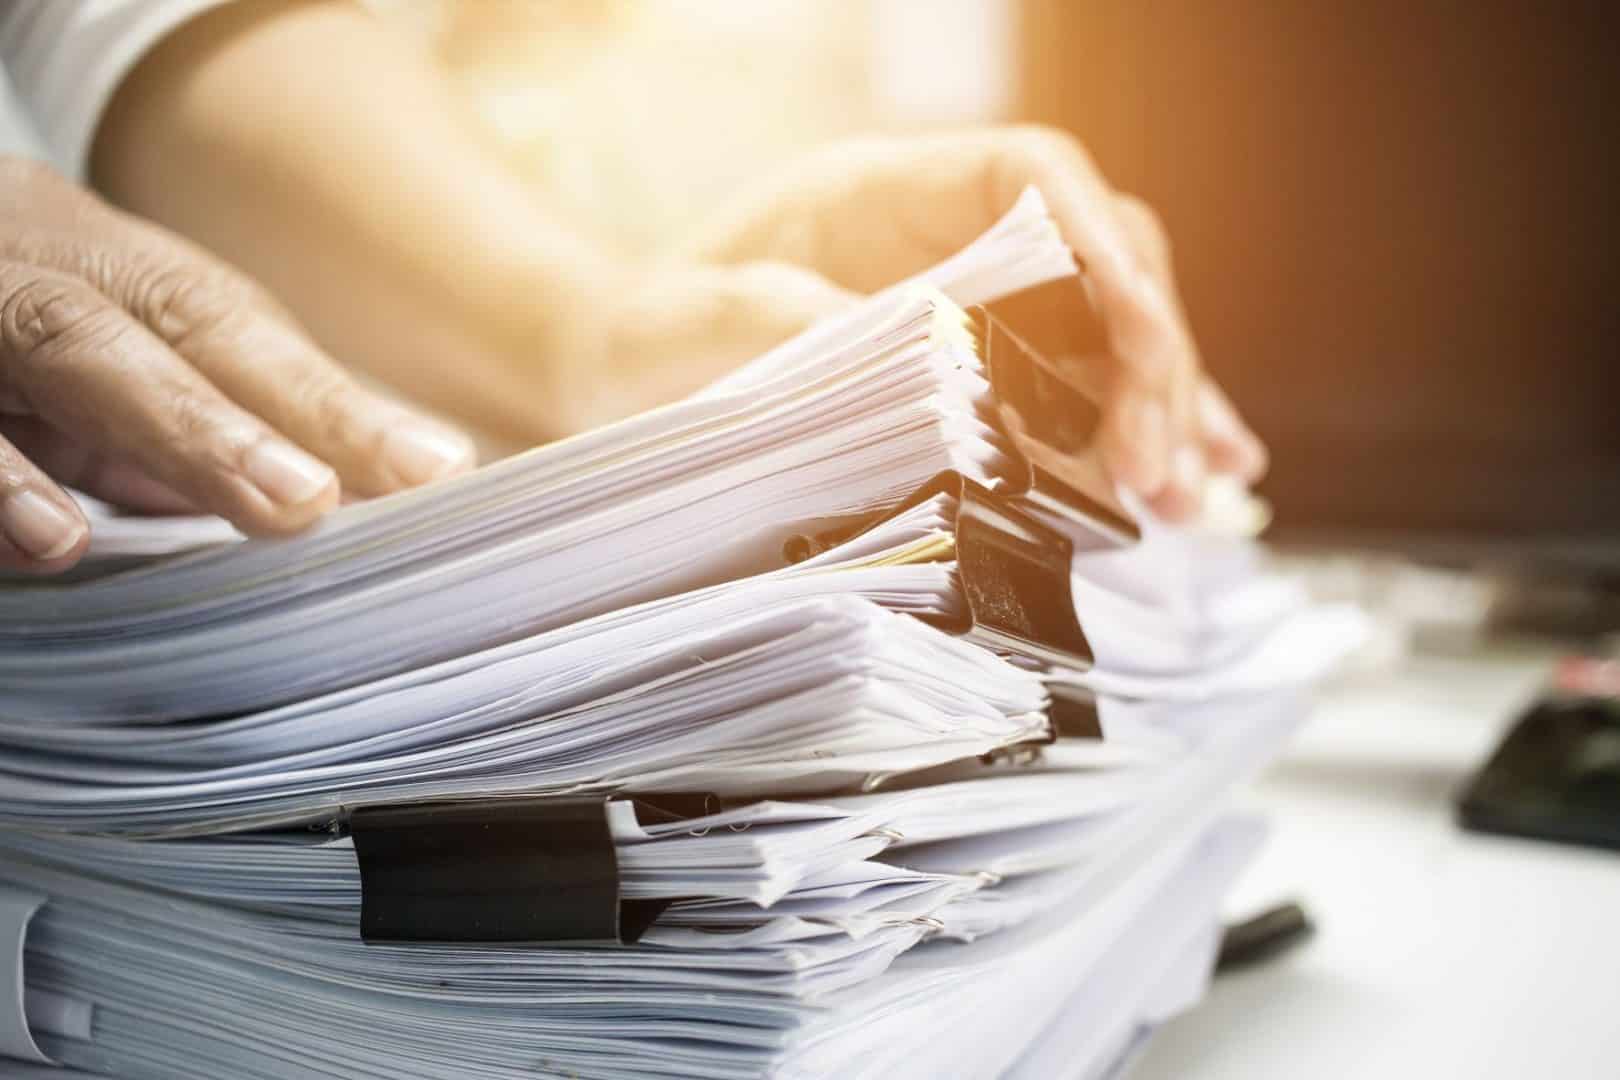 New hire paperwork can be replaced by digital tools